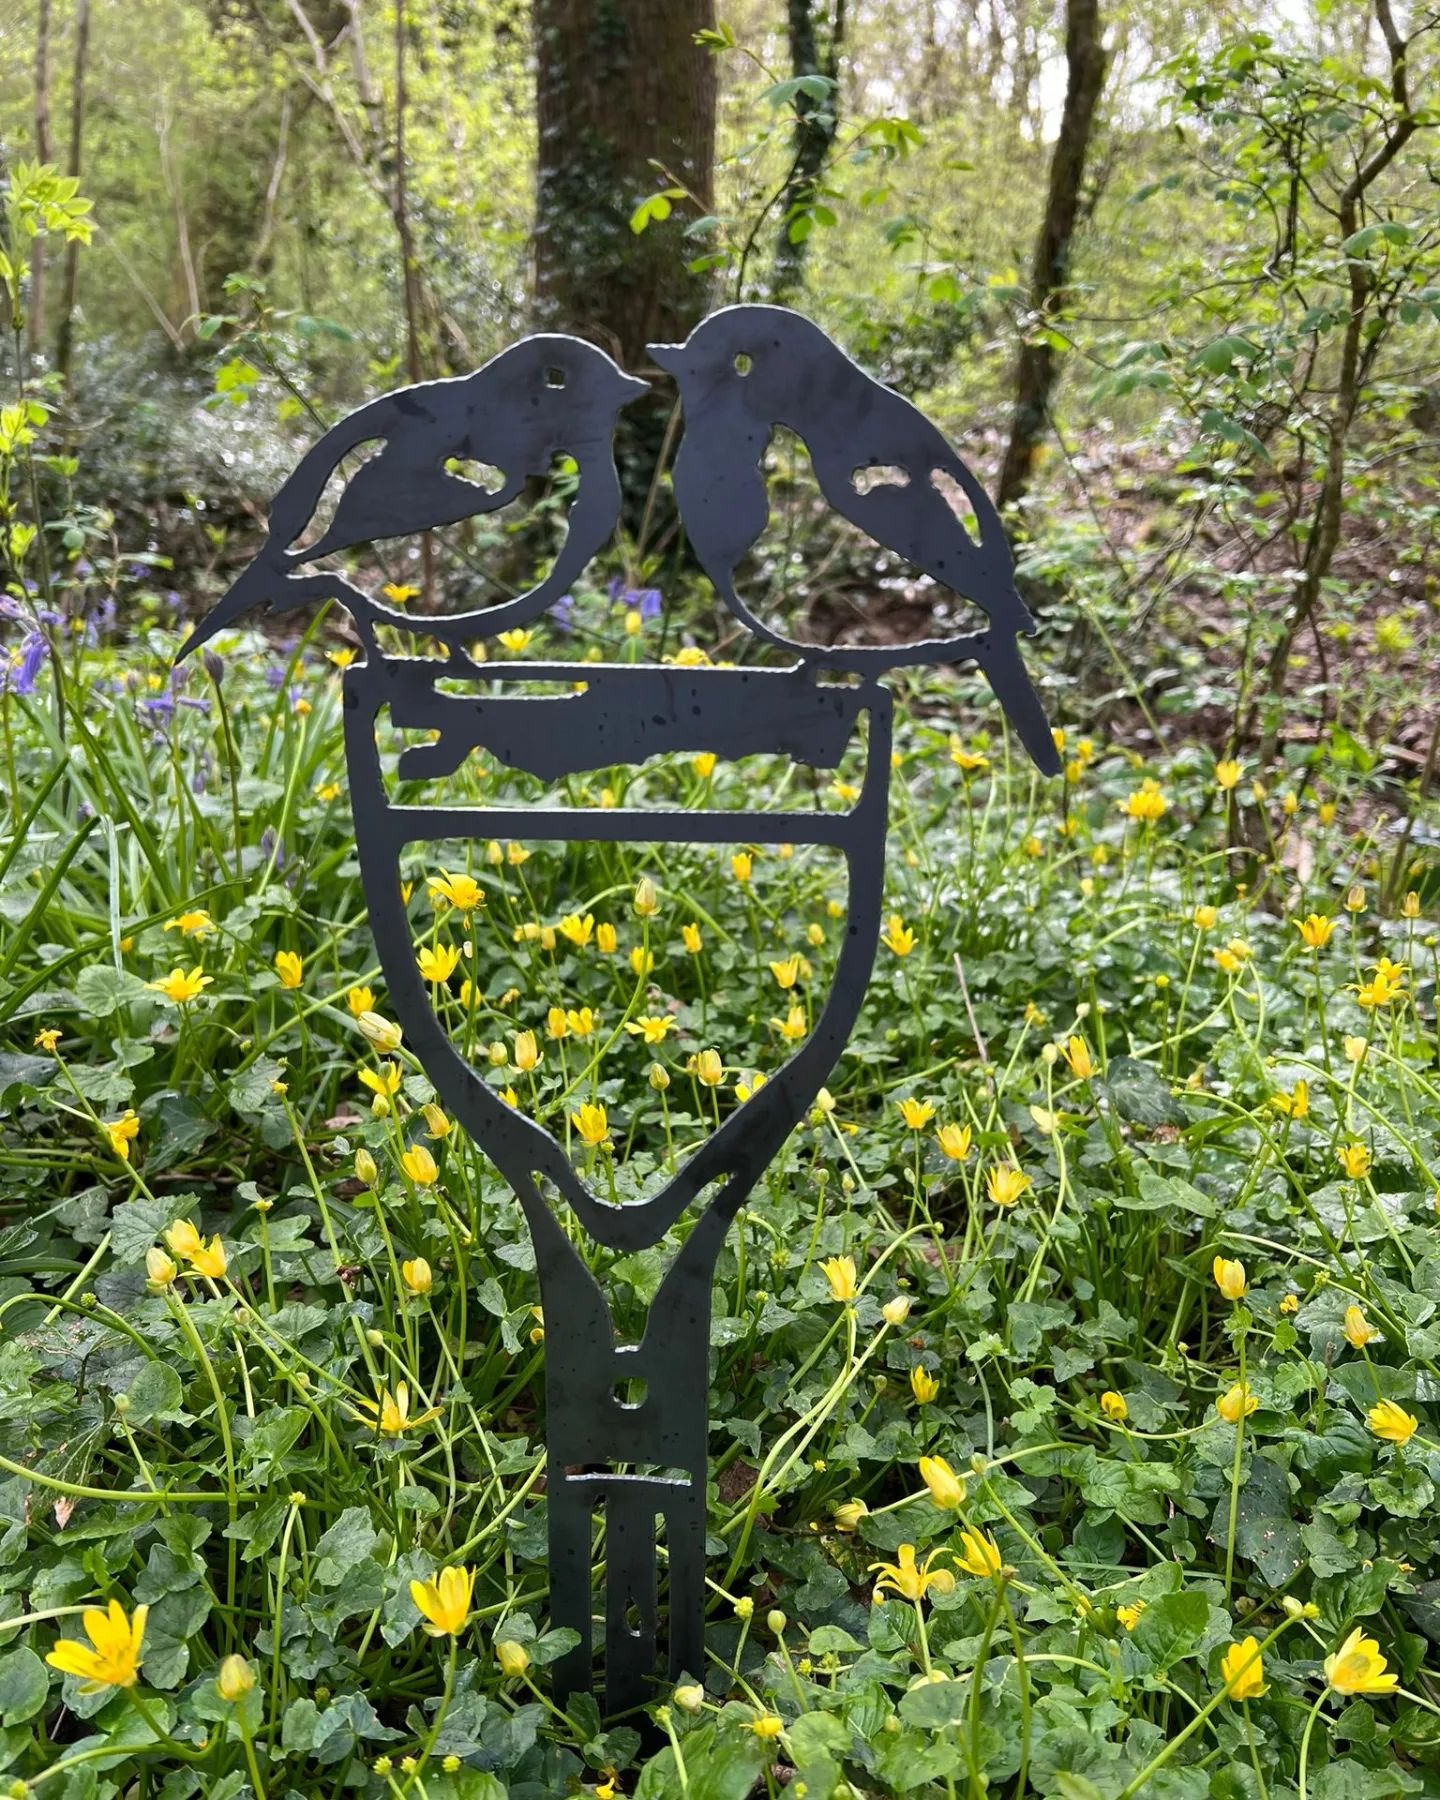 The Robin Spade🌼

The final spade in our latest product release. All spades are available on the website - link in the bio.

#robins #birds #birdsofinstagram #metalart #gardenart #steelart #gardendecor #handmade #handcrafted #fyp #nature #steel #gar